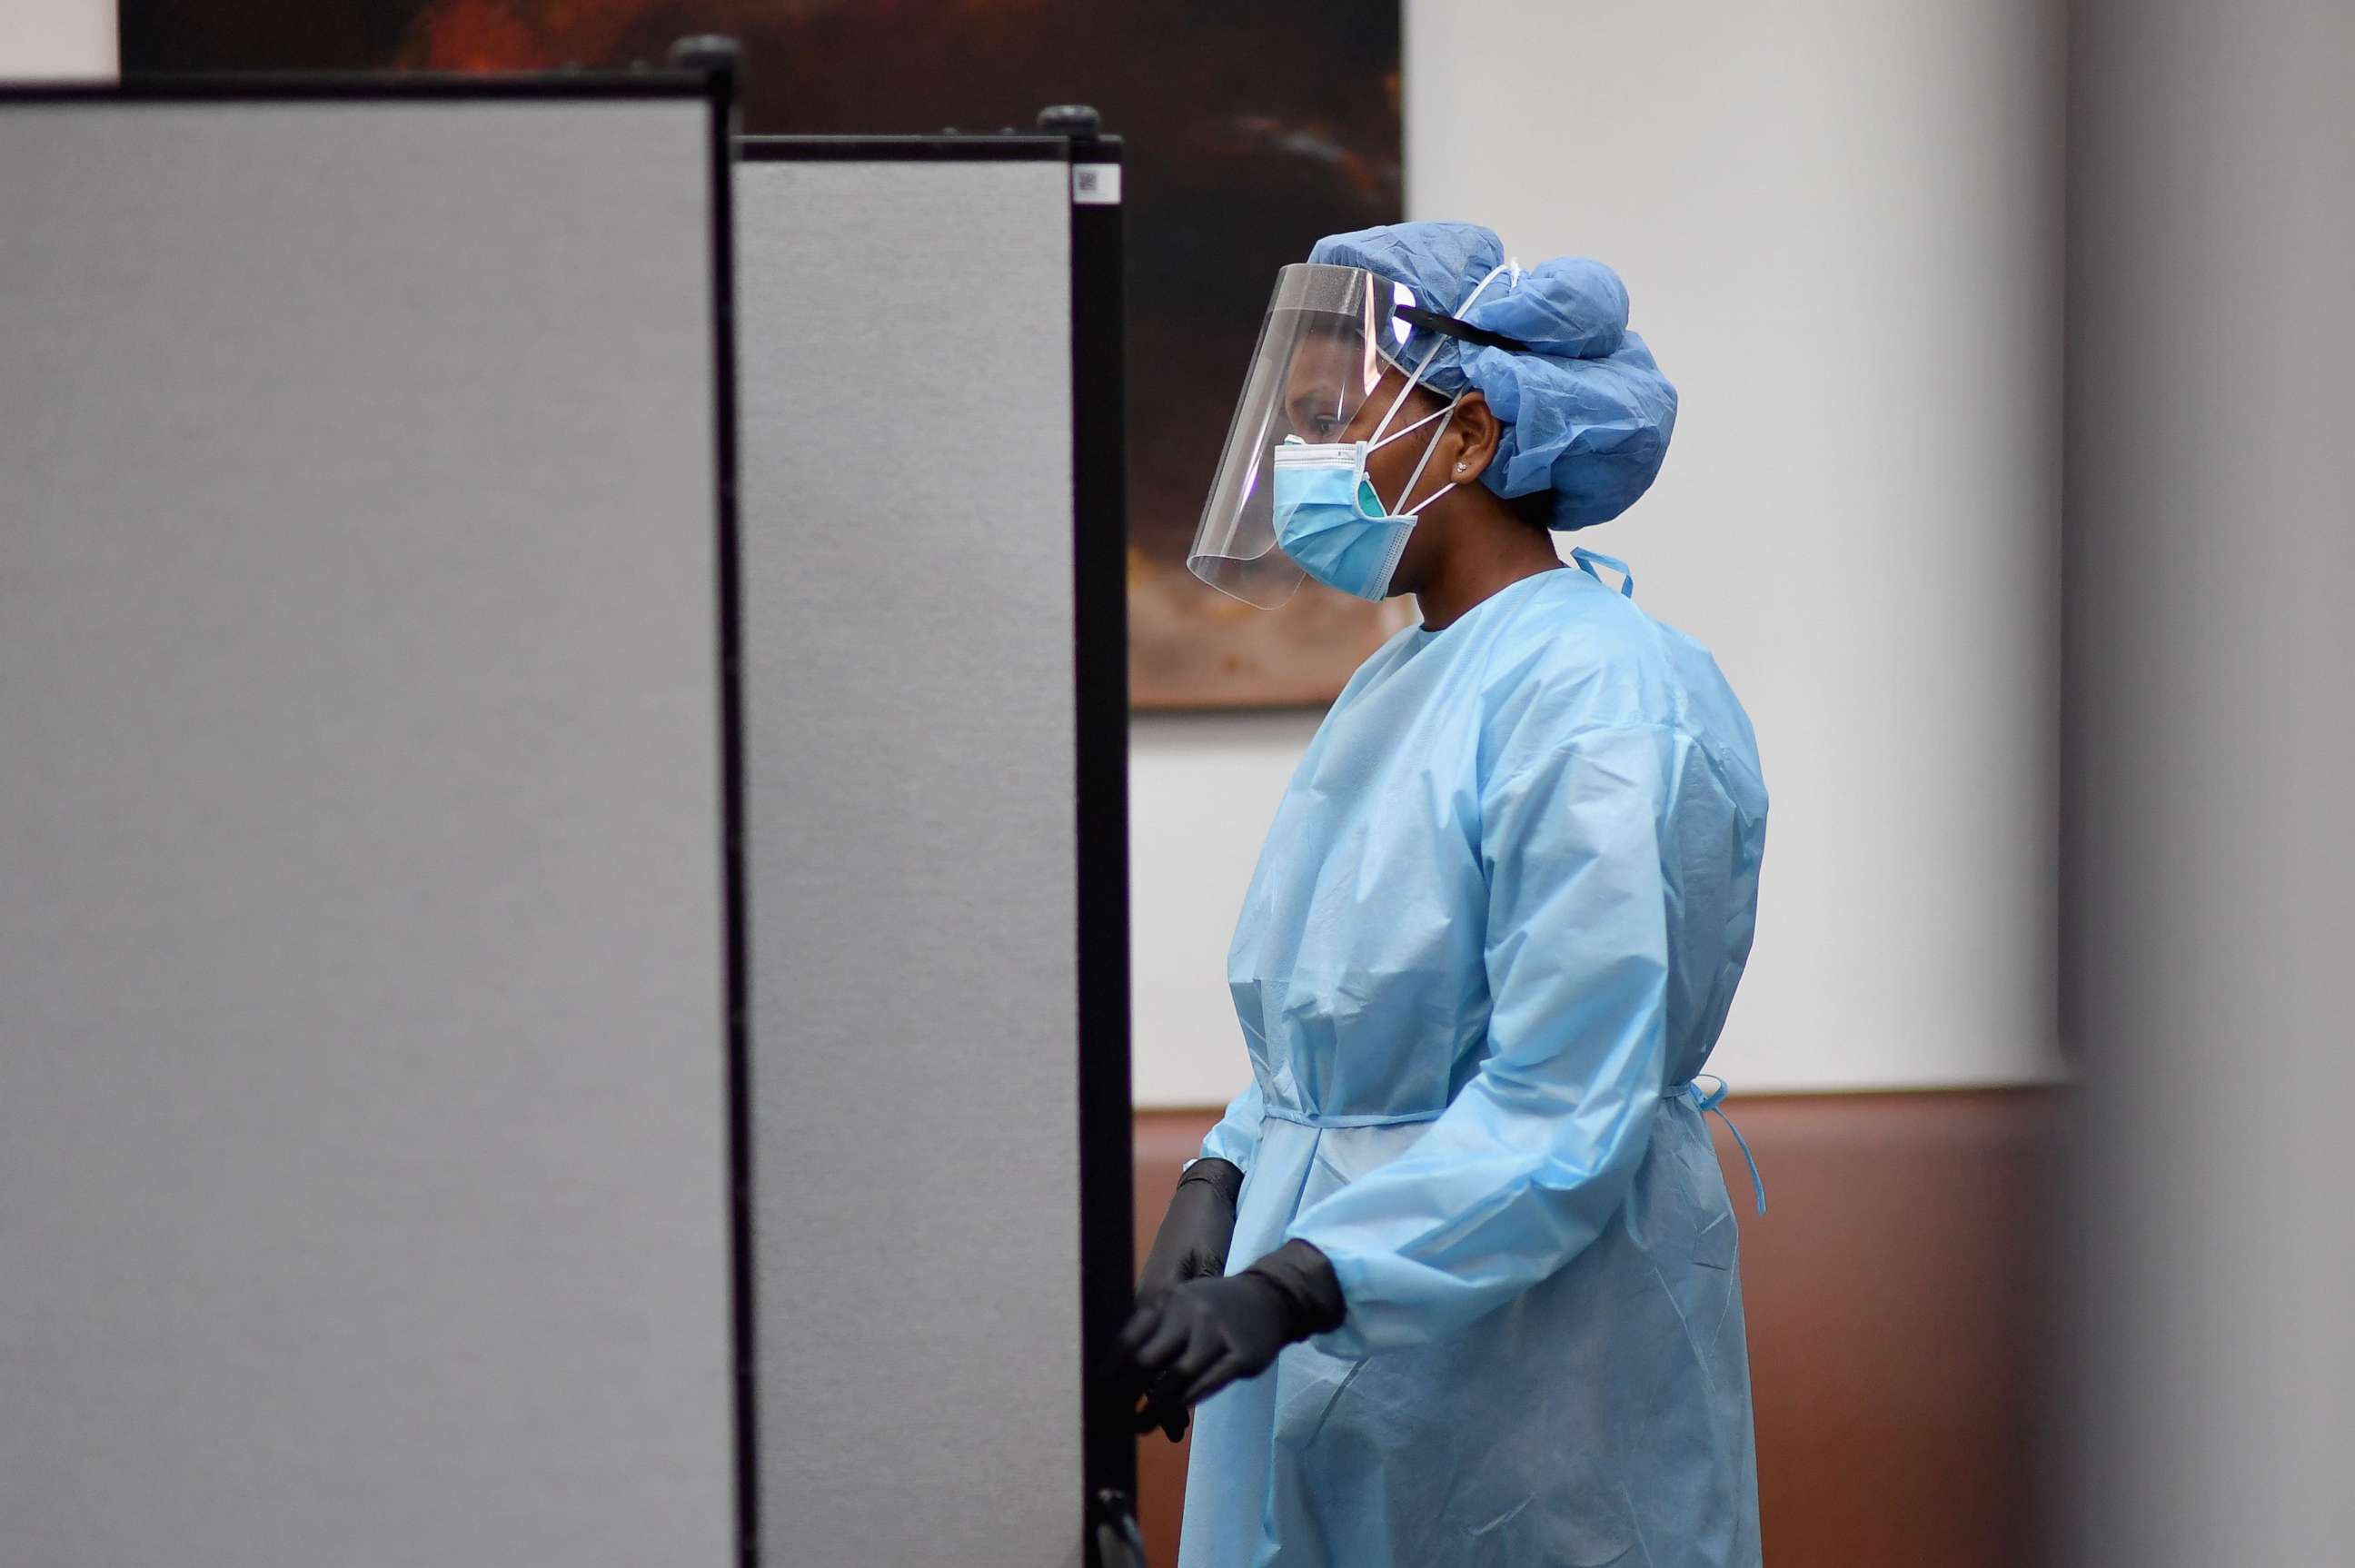 PHOTO: A registered nurse waits to test residents for COVID-19 antibodies at Abyssinian Baptist Church in the Harlem neighborhood of New York City on May 14, 2020.